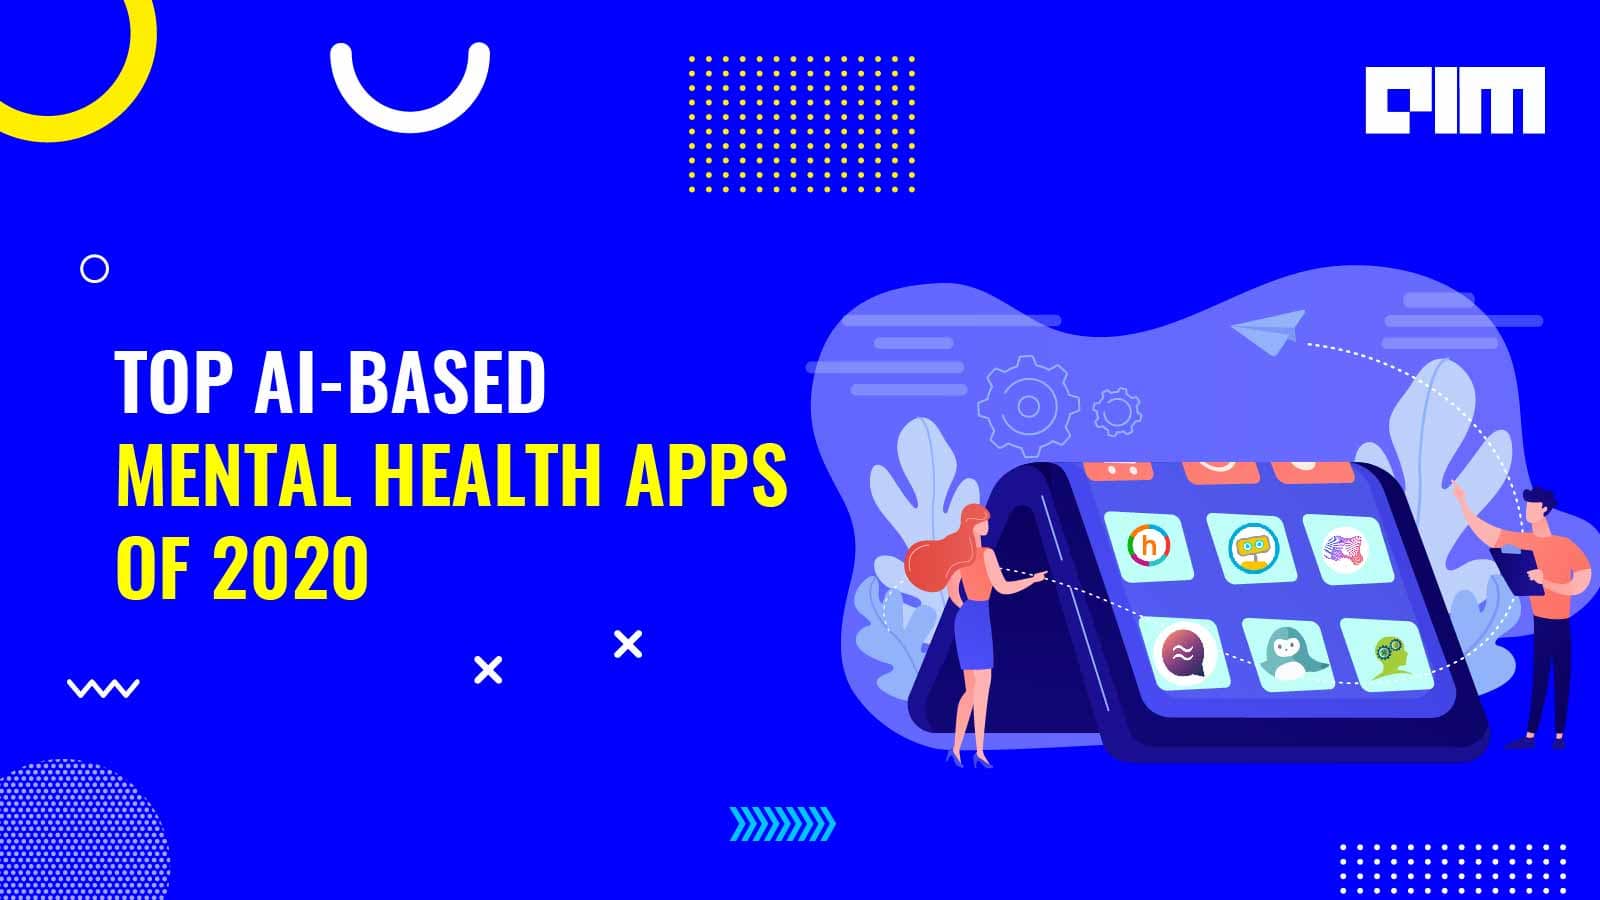 Top AI-based Mental Health Apps Of 2020